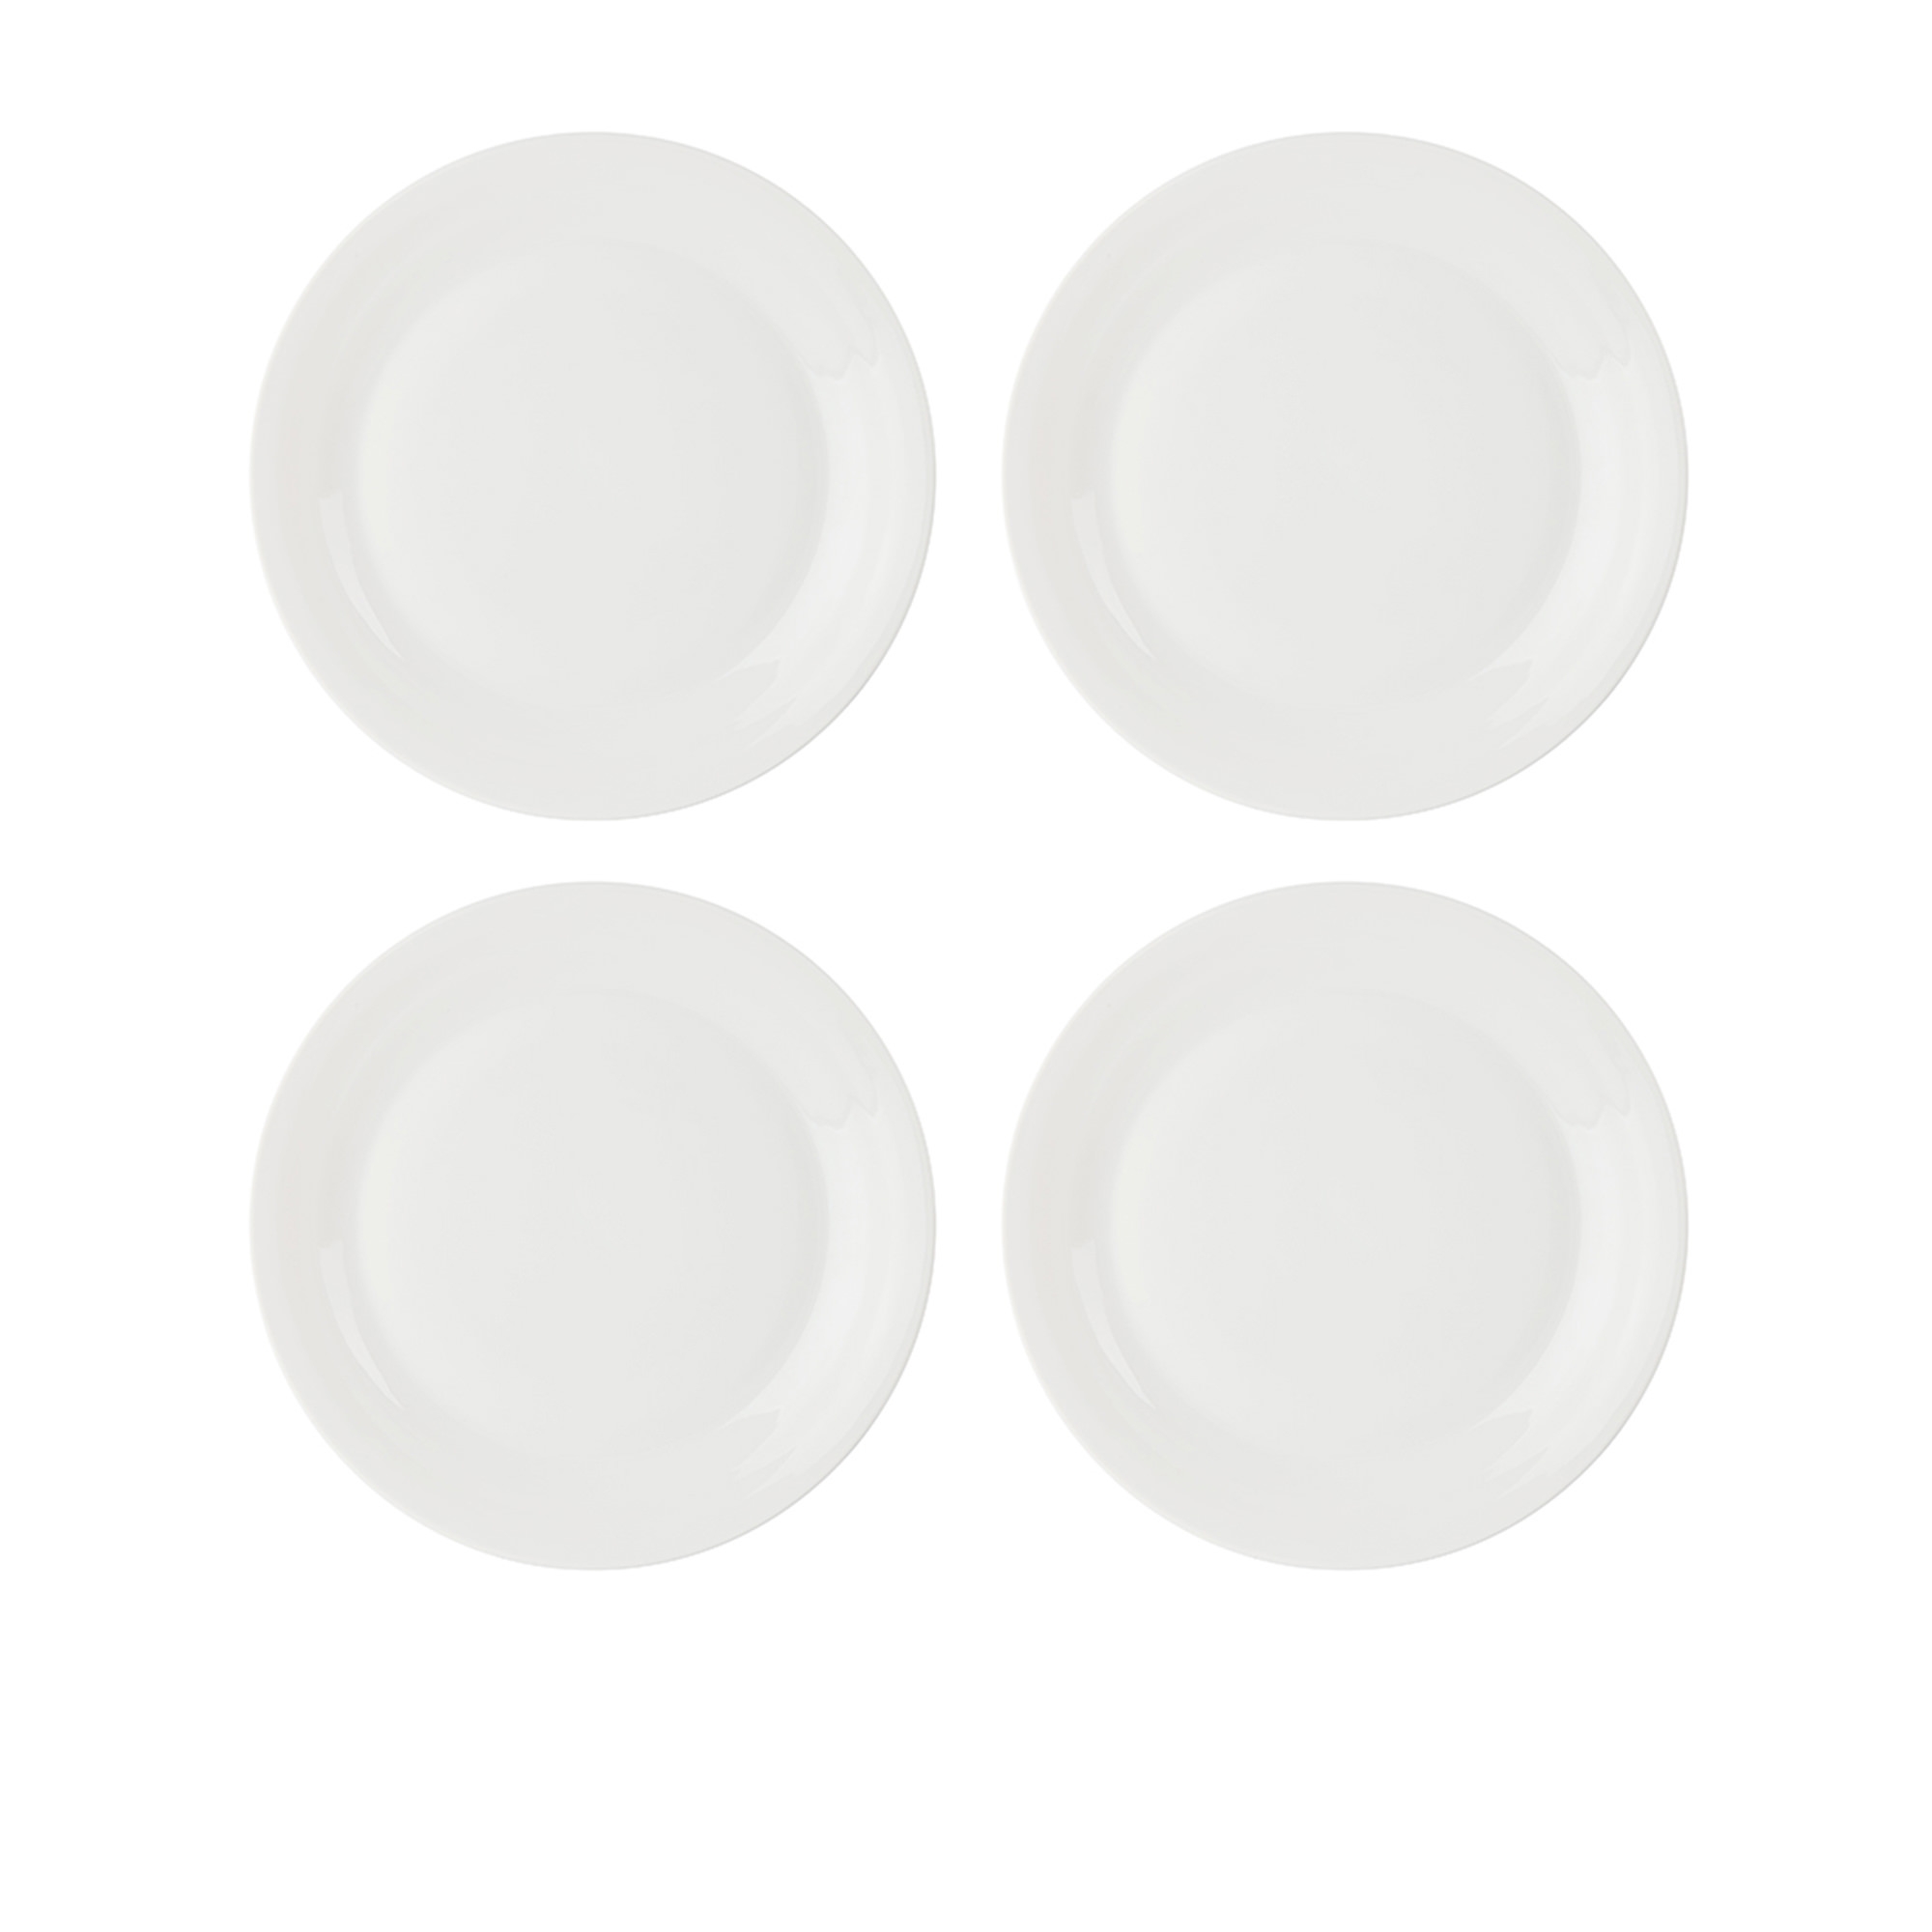 Royal Doulton 1815 Pure Dinner Plate Set of 4 White Image 1